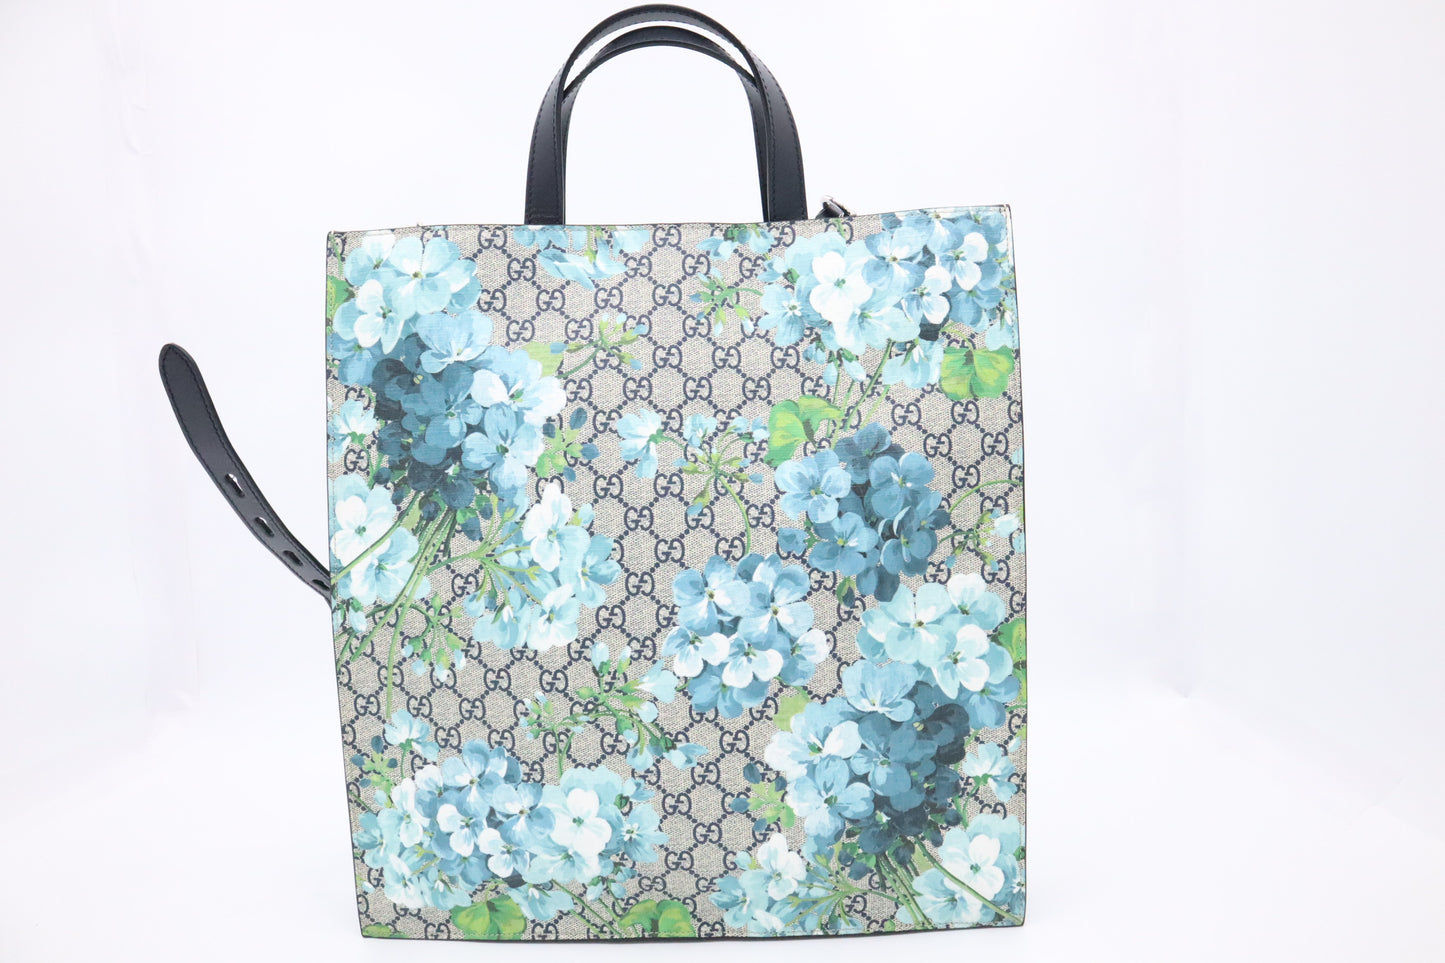 Gucci Tote in Blue Blooms GG Canvas